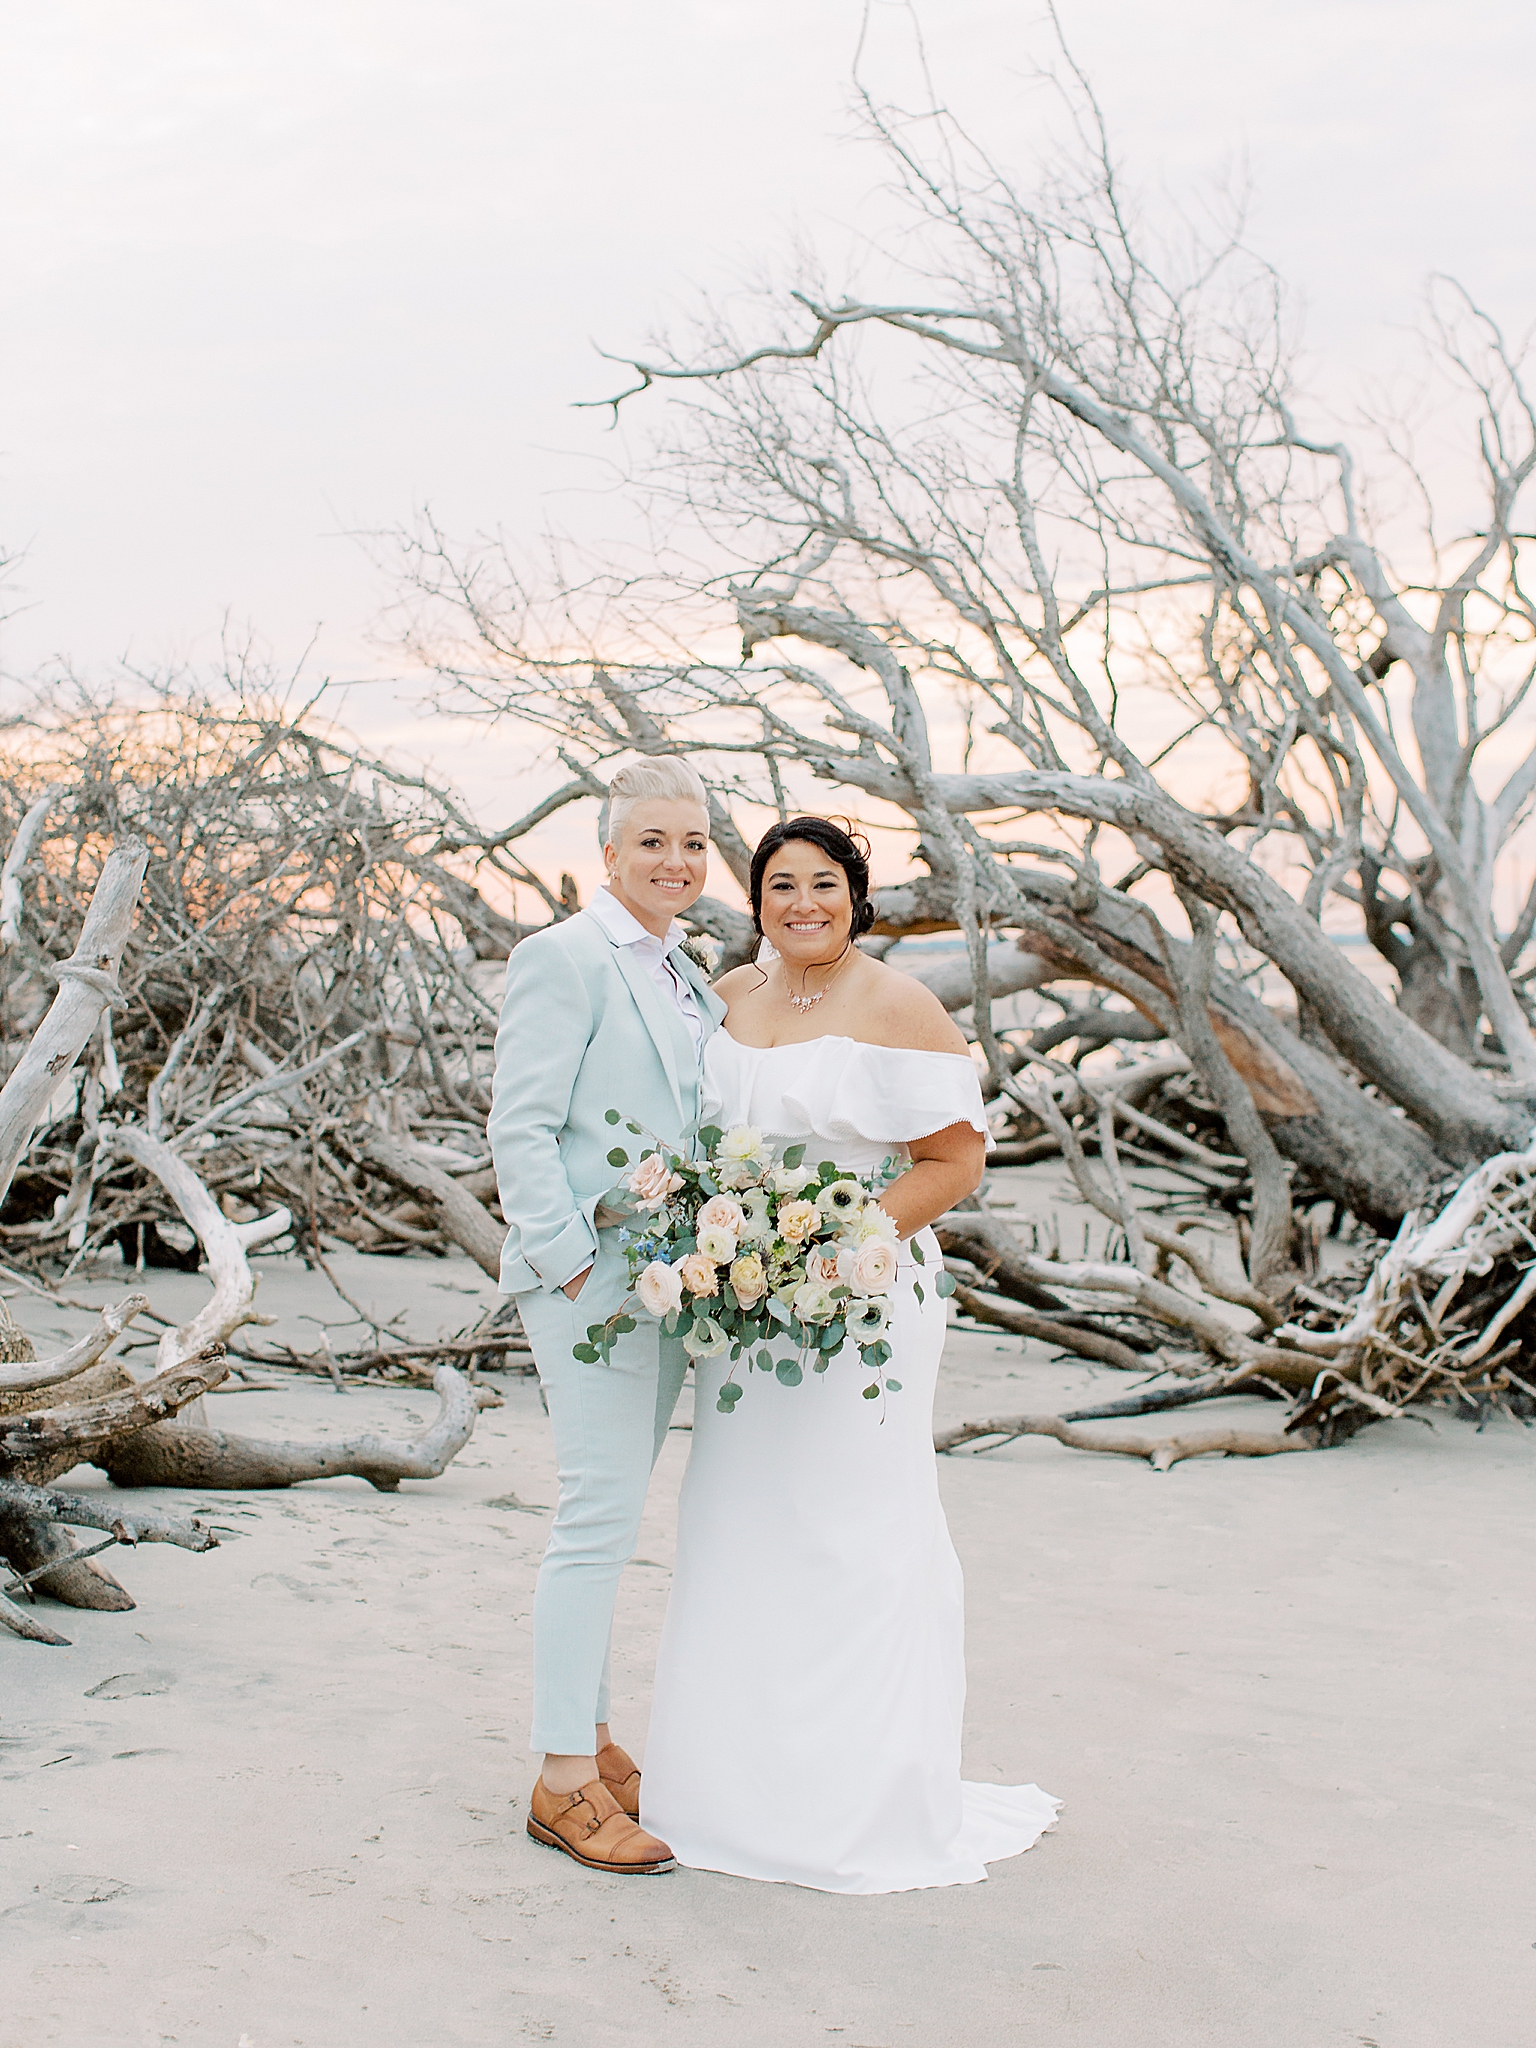 South Carolina newlyweds pose in front of driftwood